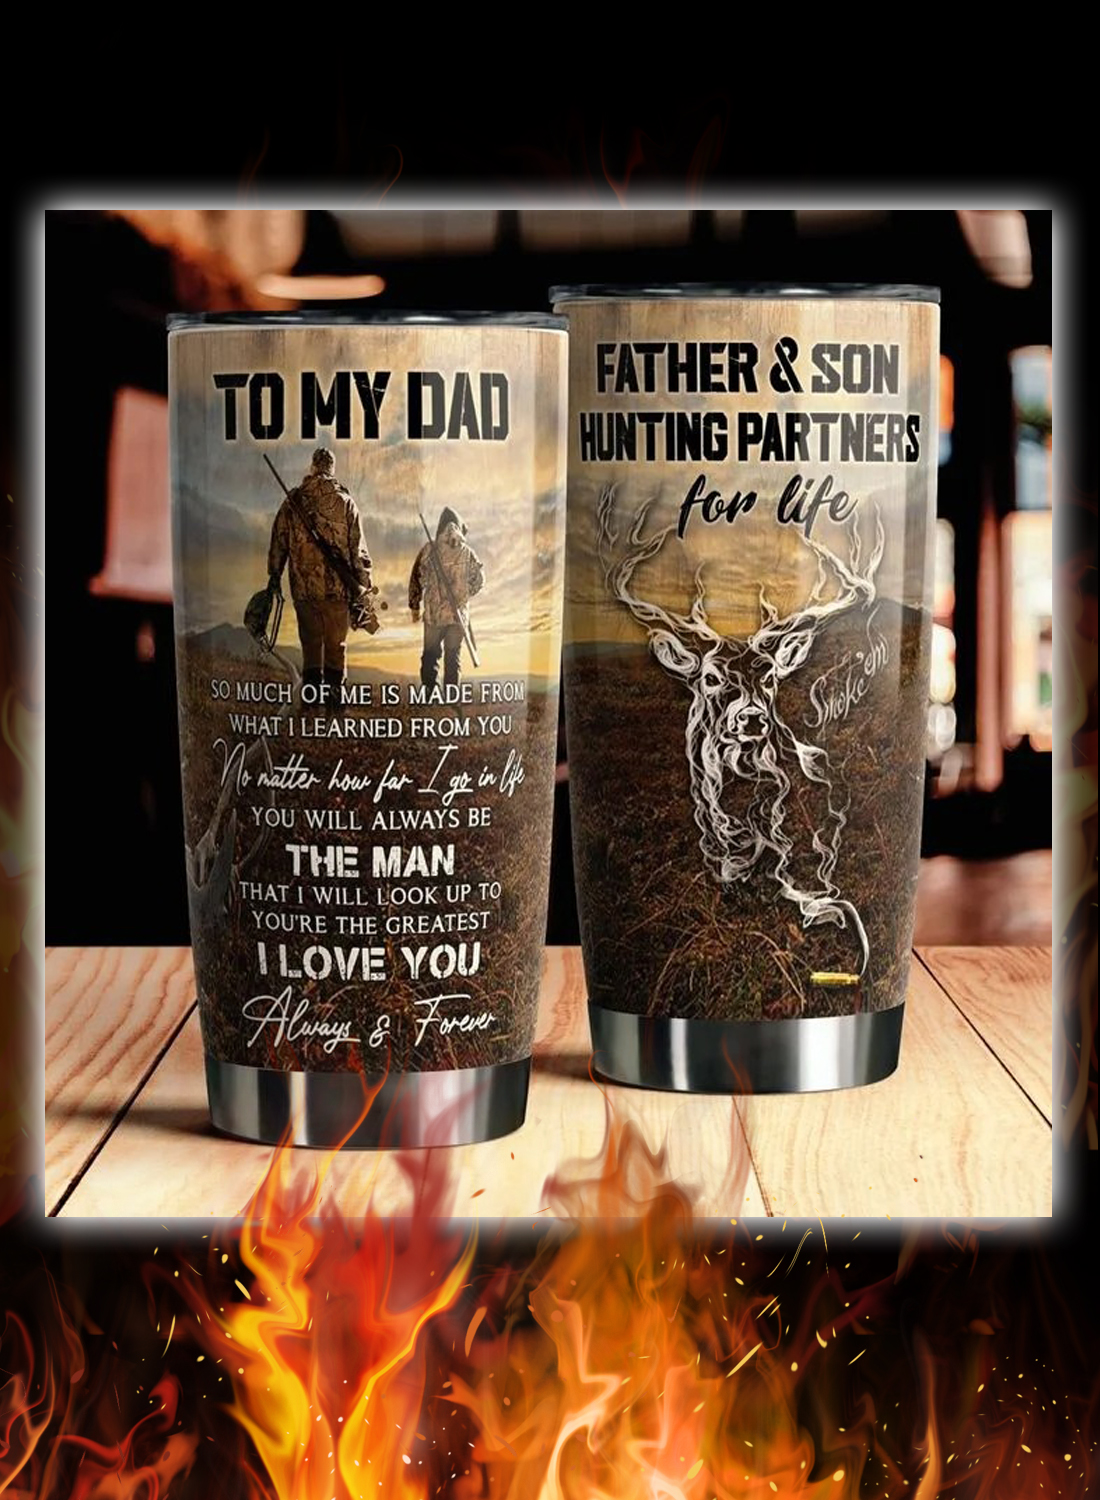 To my dad father and son hunting partners for life tumbler